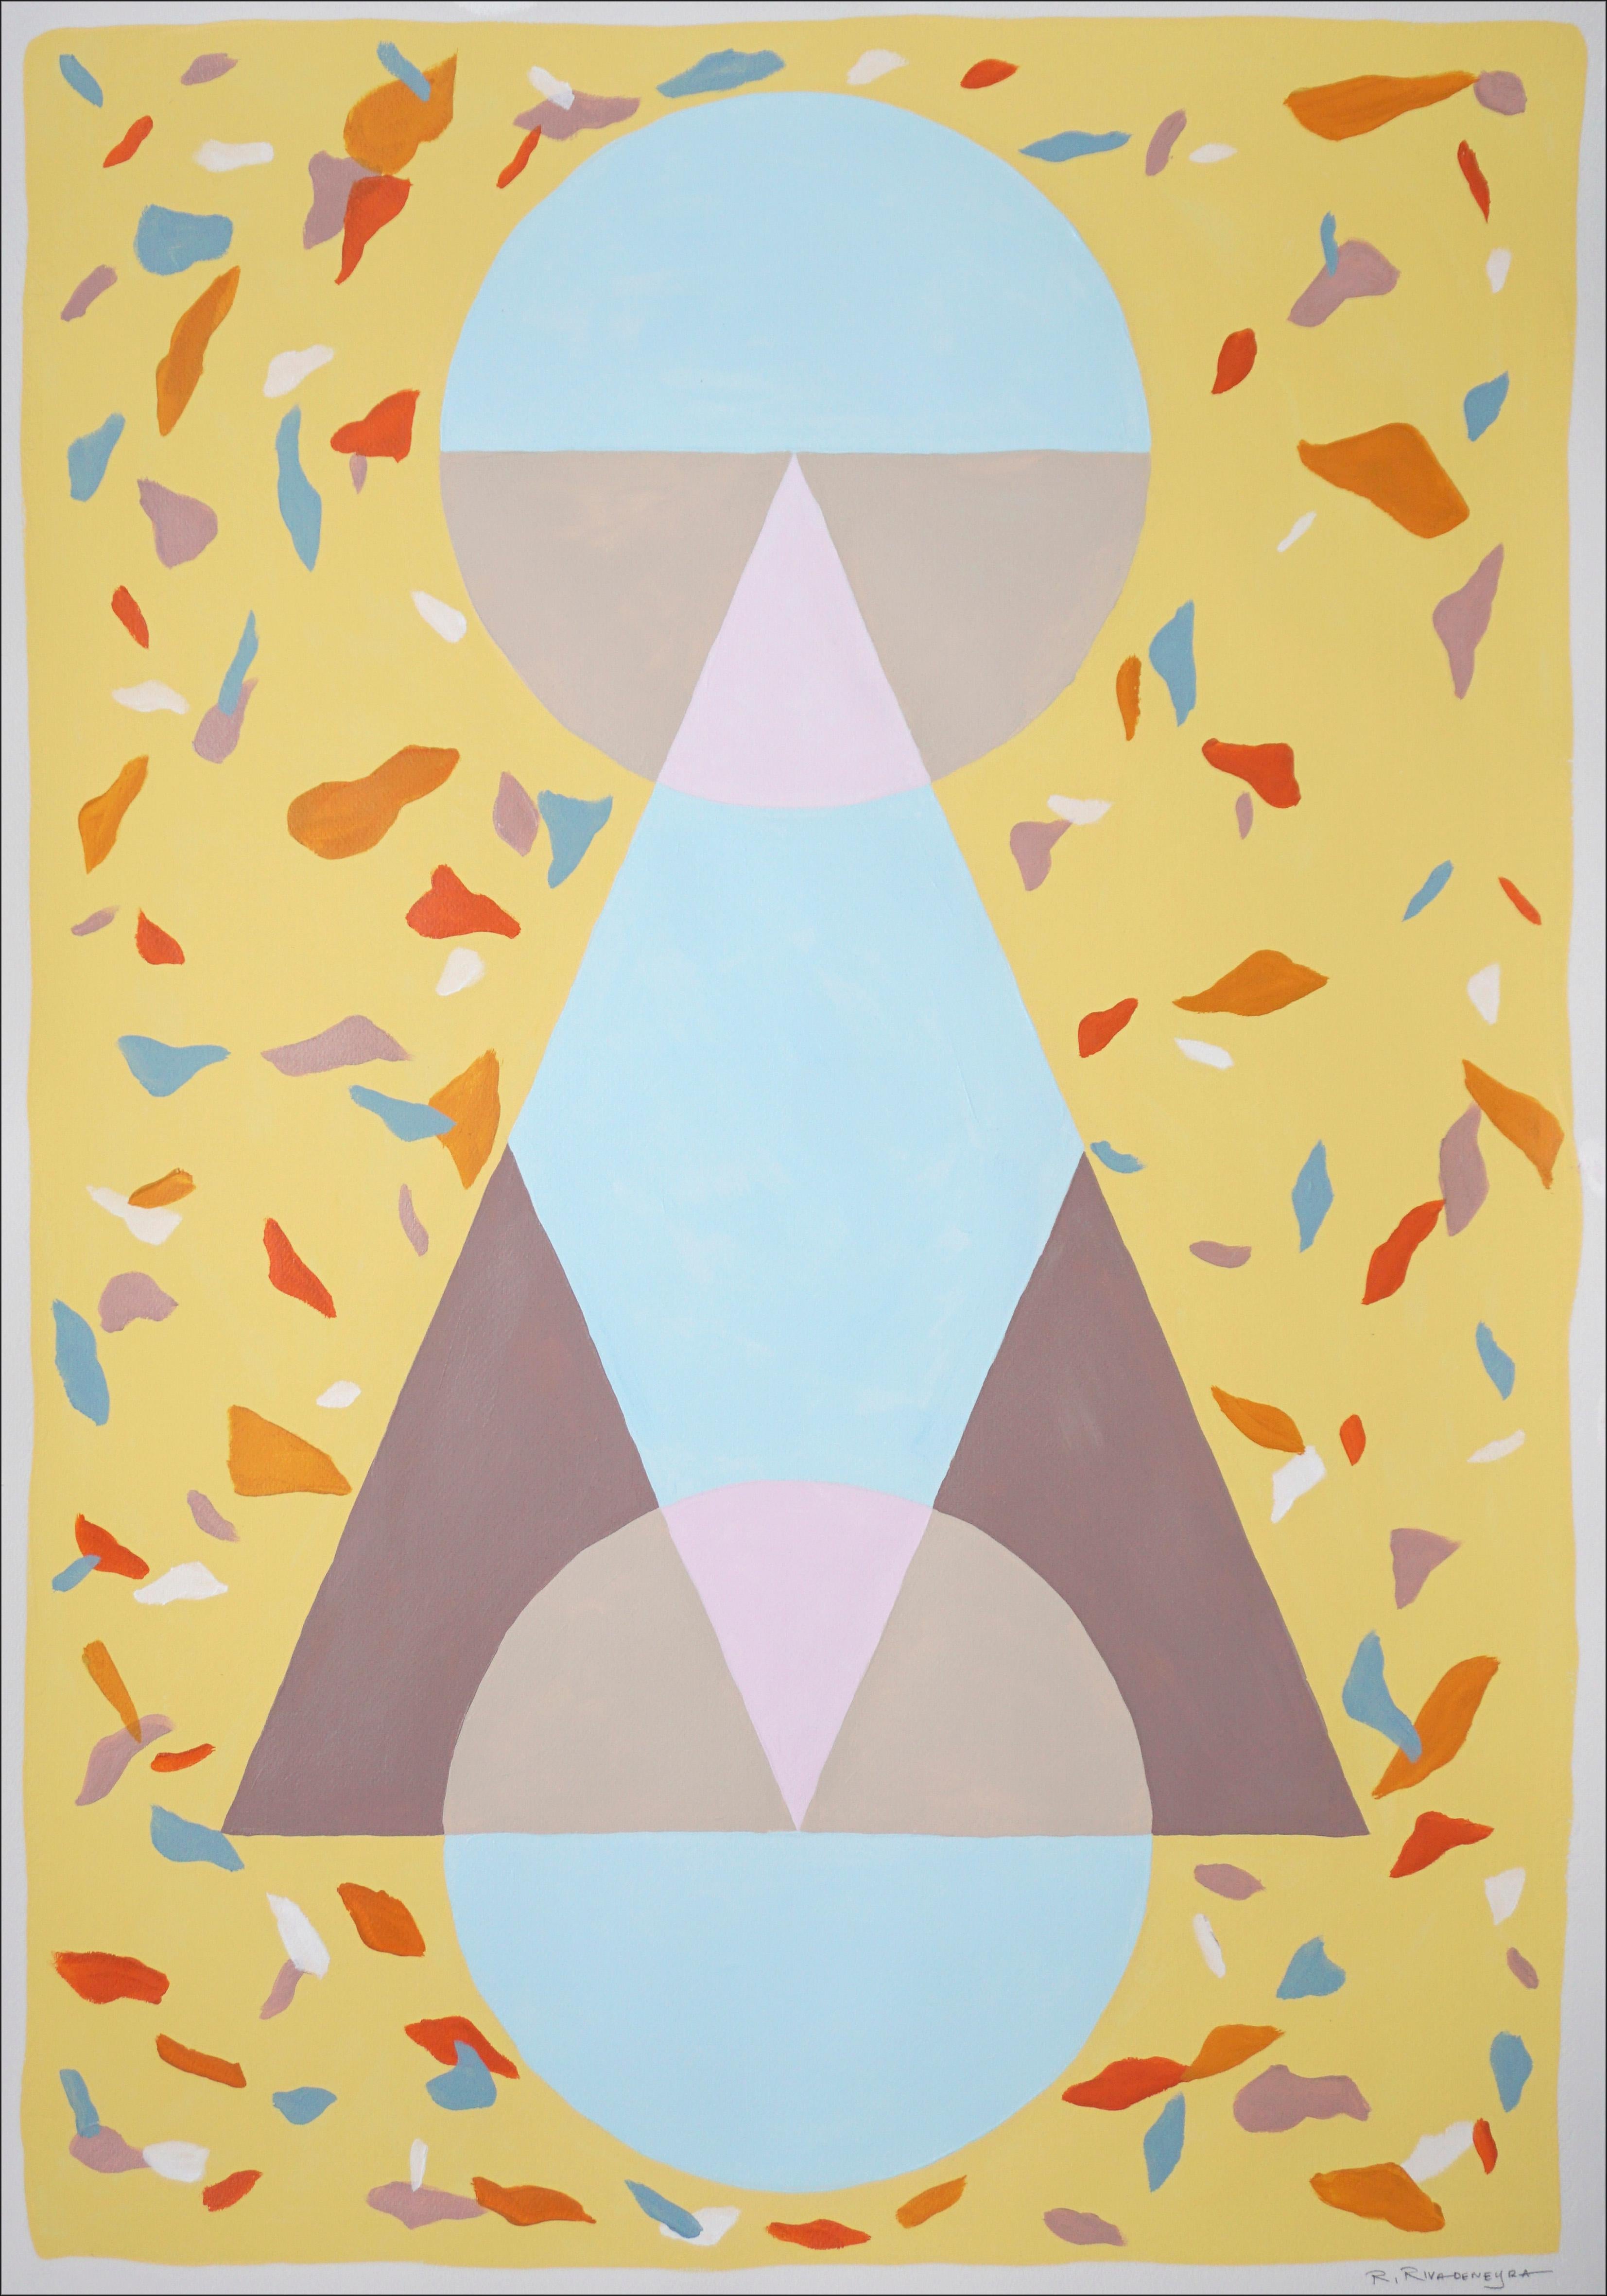 Ryan Rivadeneyra Abstract Painting - Triangular Architecture in Pastel Tones, Light Yellow Background Terrazzo Shapes